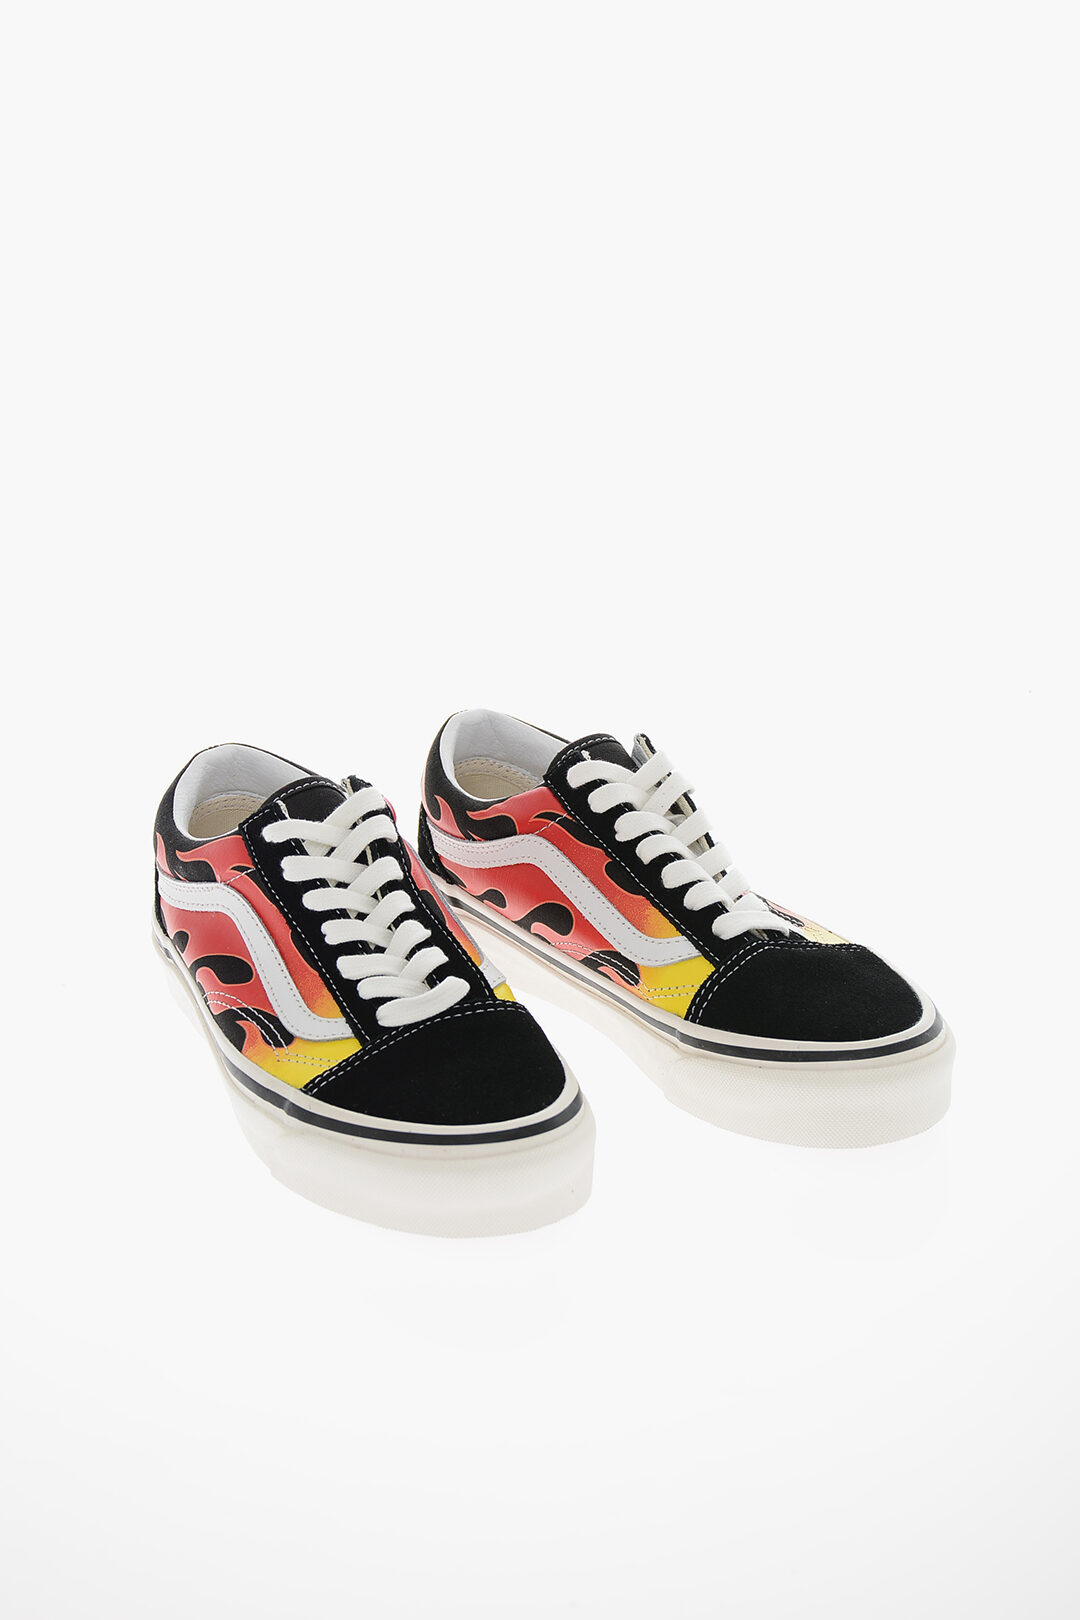 Vans FACTORY Leather and Fabric SKOOL 36 Flames Print women - Glamood Outlet